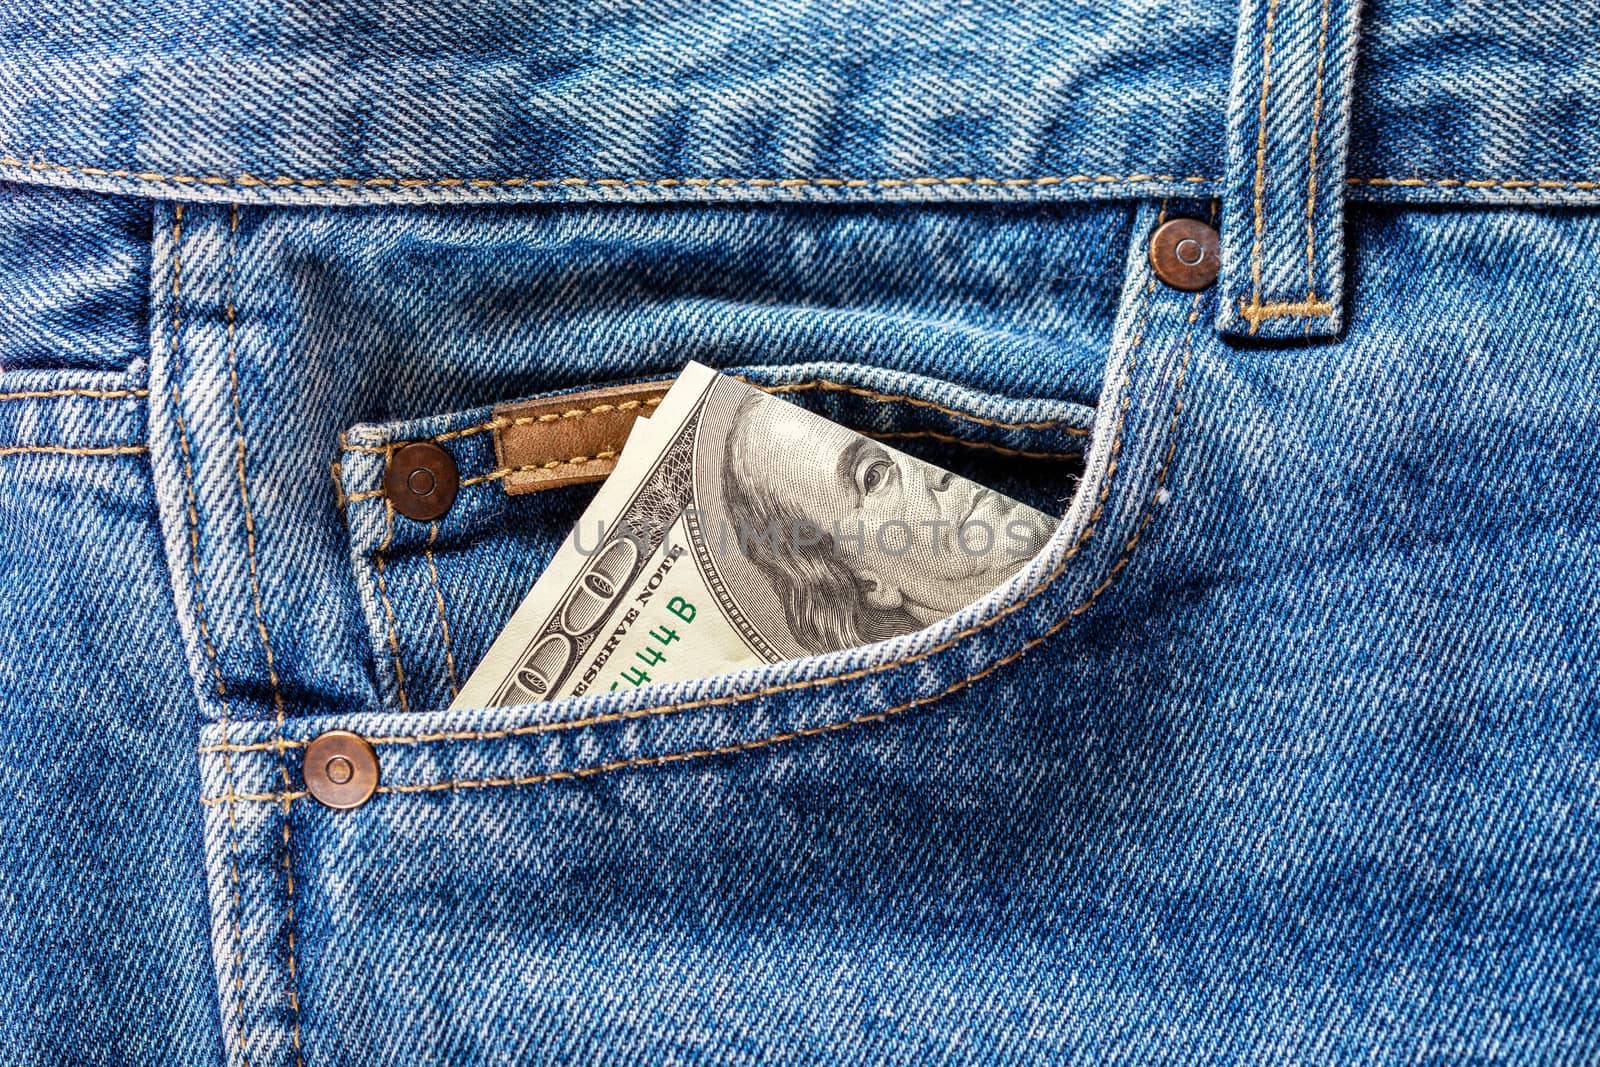 a hundred dollar banknote sticking out from front pocket of jeans by z1b